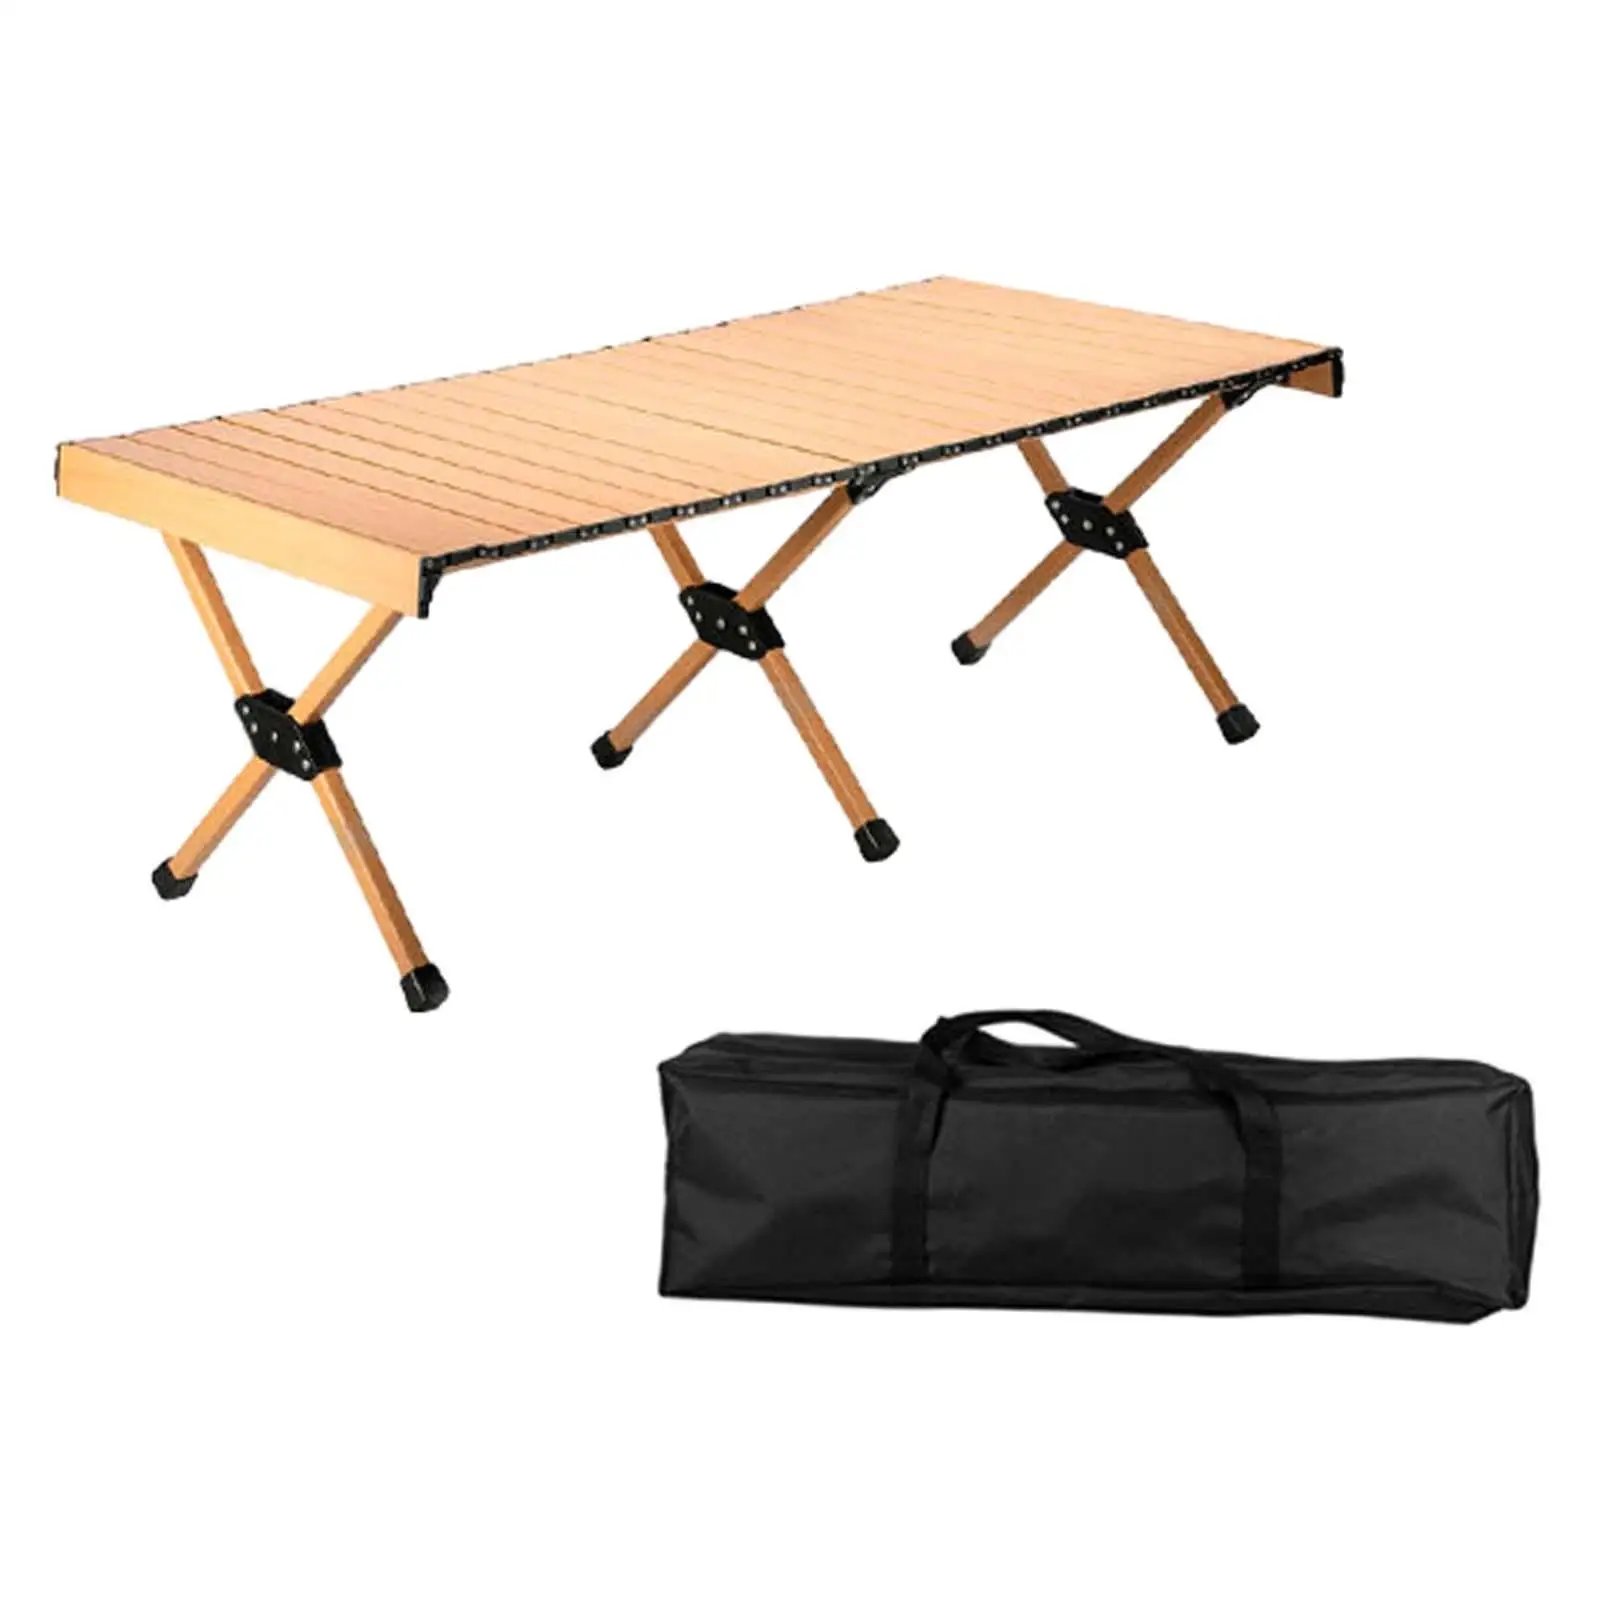 Camping Folding Table Roll up Lightweight Portable for Garden Balcony